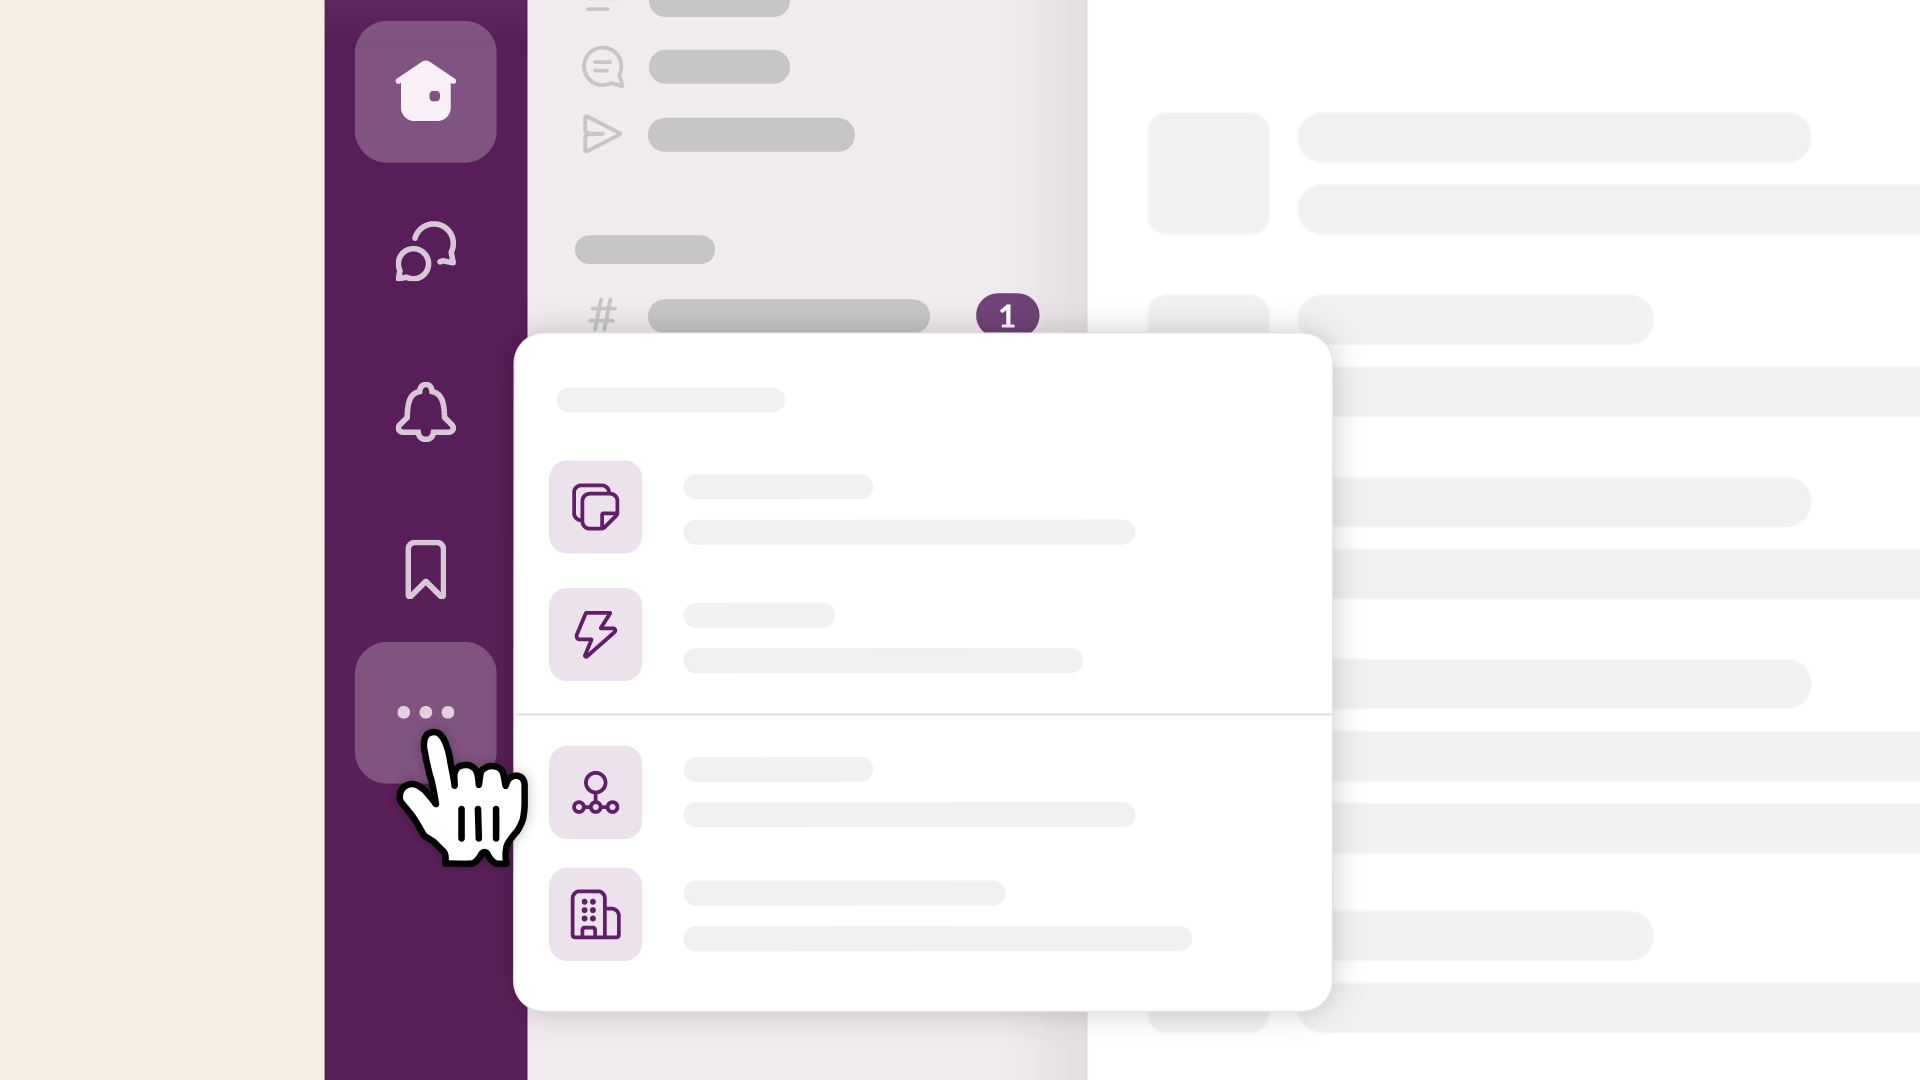 An image of a cursor hovering over the More icon in the Slack sidebar